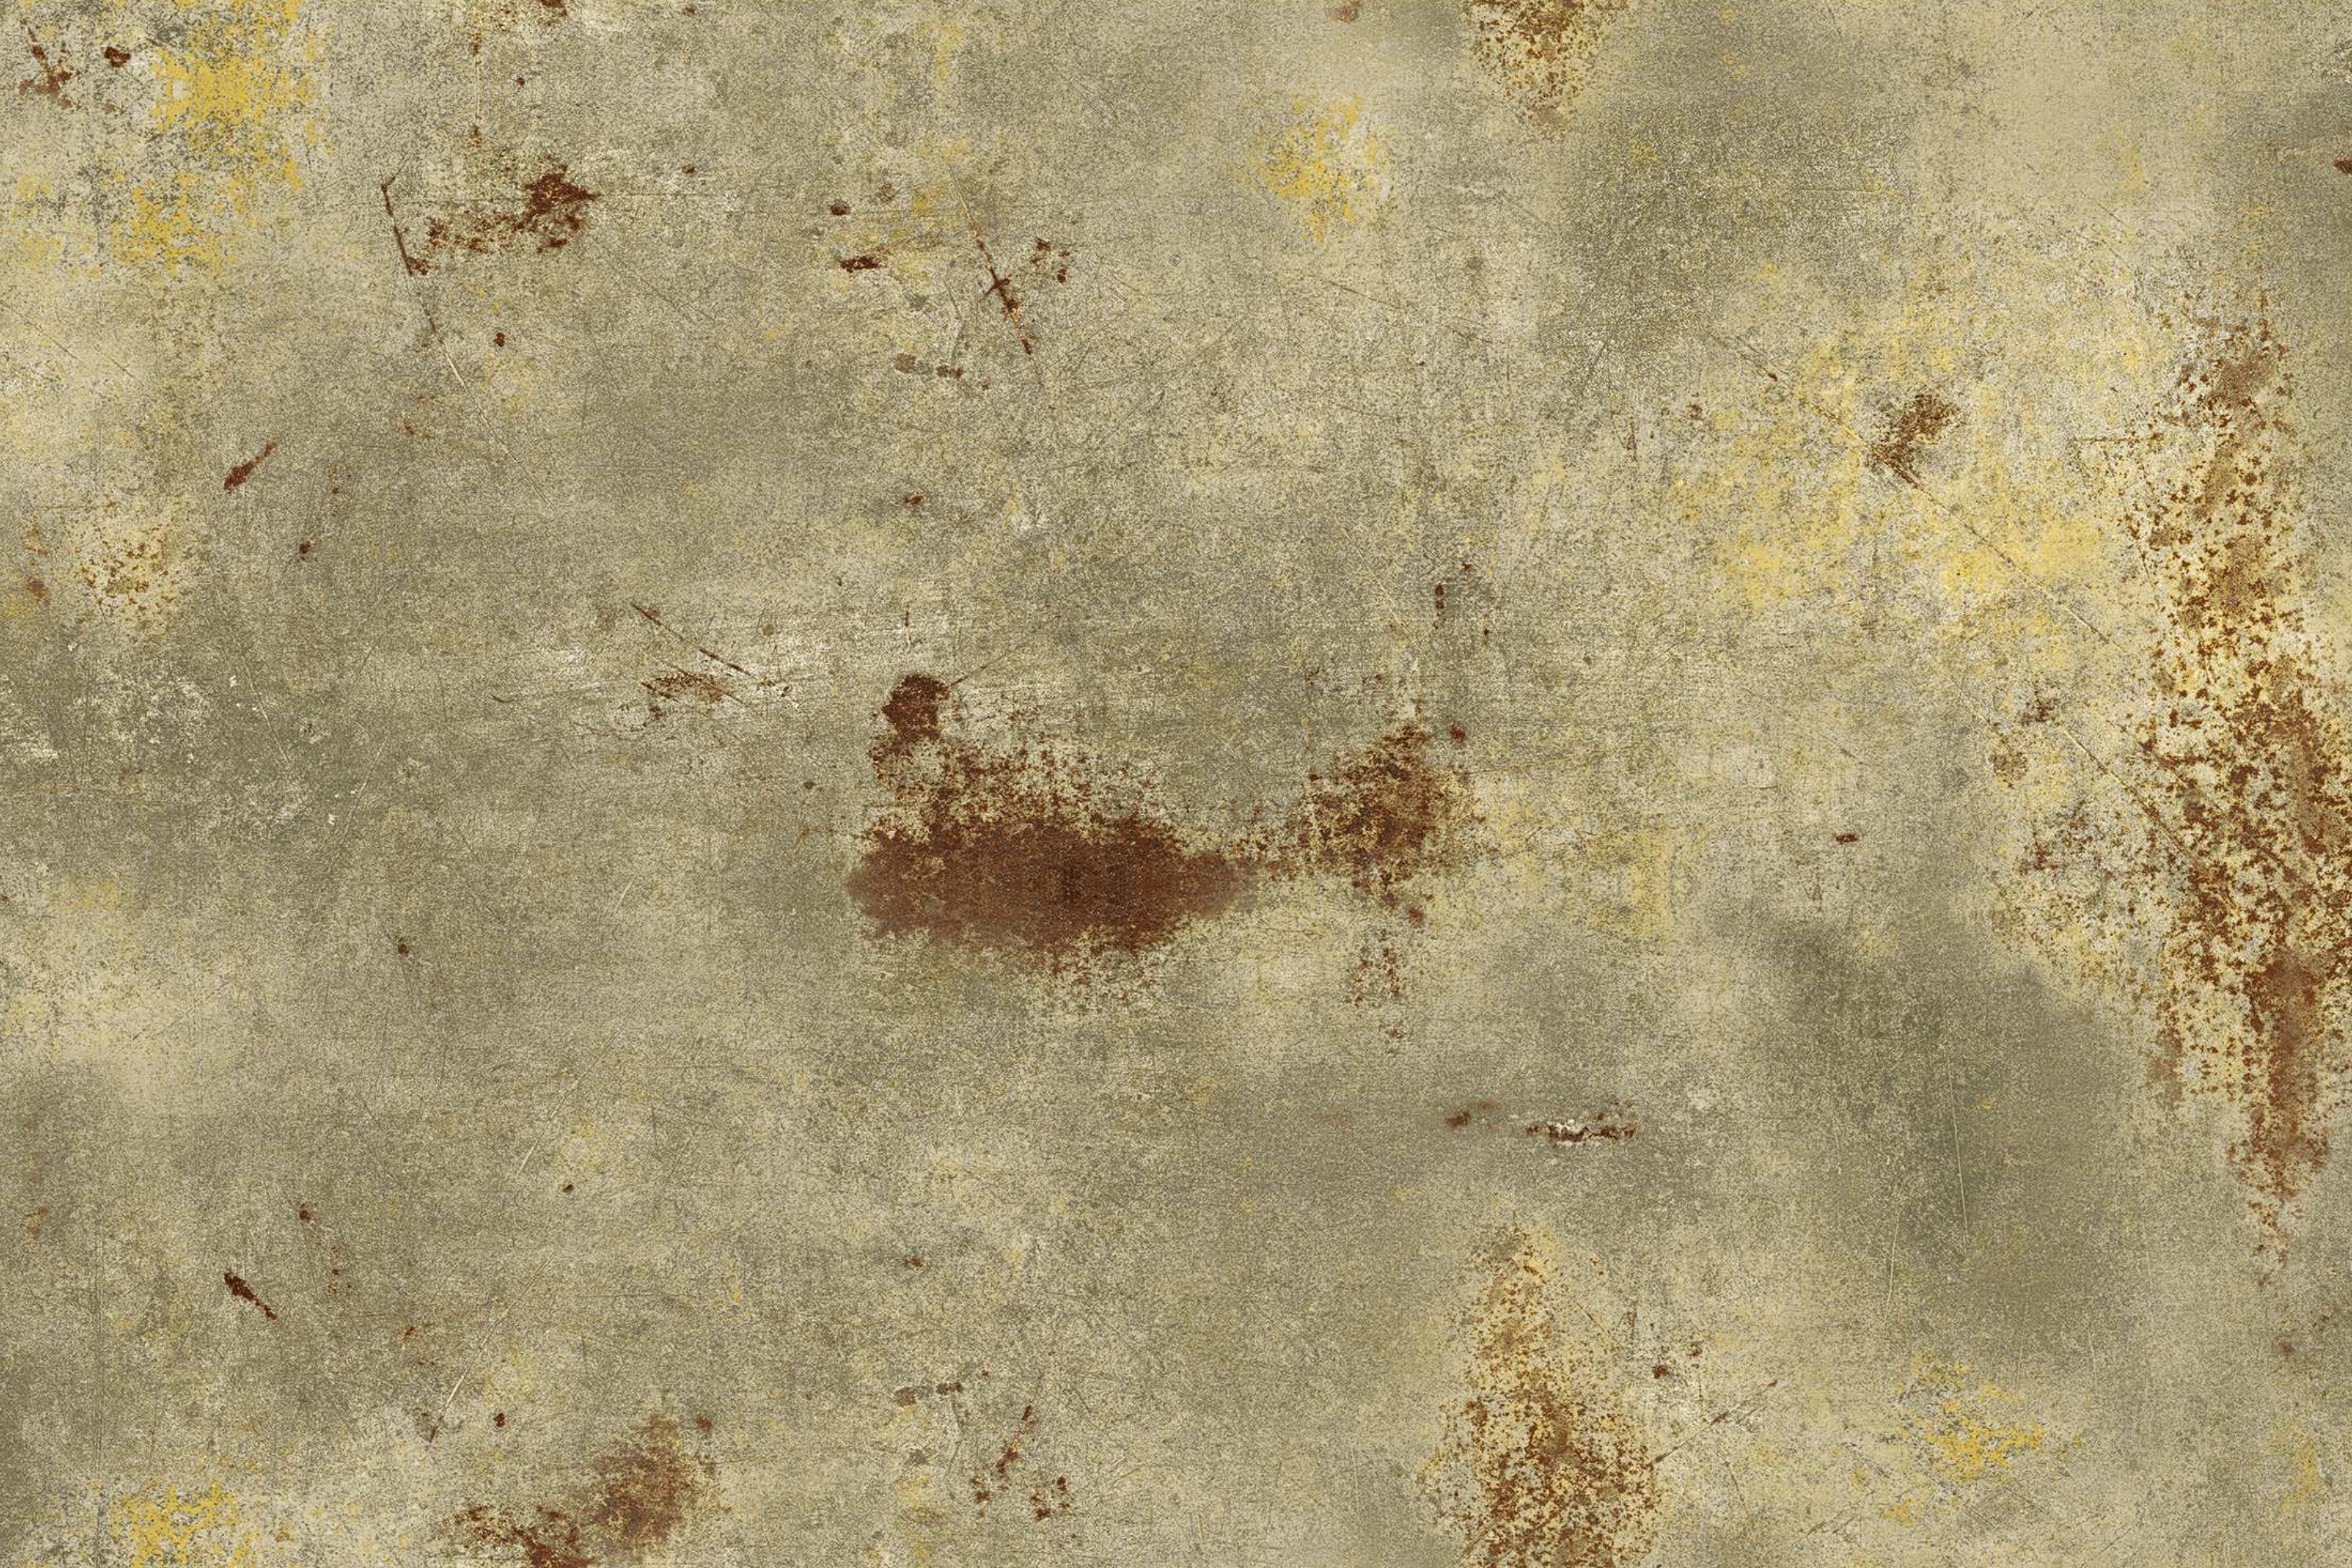 ColourDrive-Korean Wallpaper Rust 88431 House Wall Wallpaper Design for Bedroom,Guest Room,Dining Hall